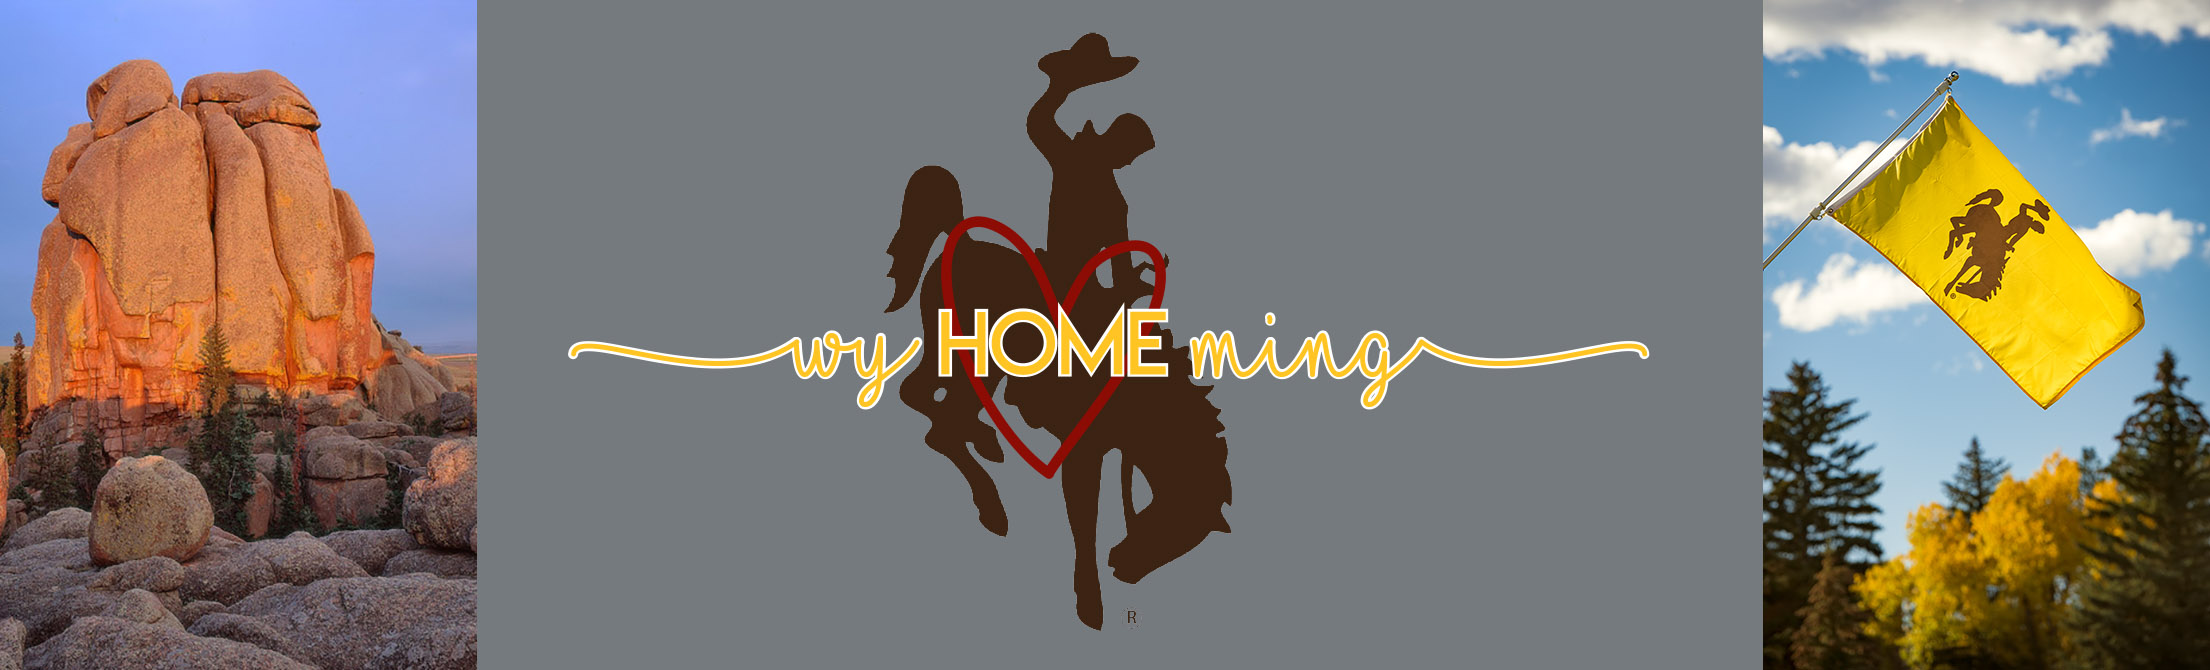 steamboat logo with heart and text wyHOMEing